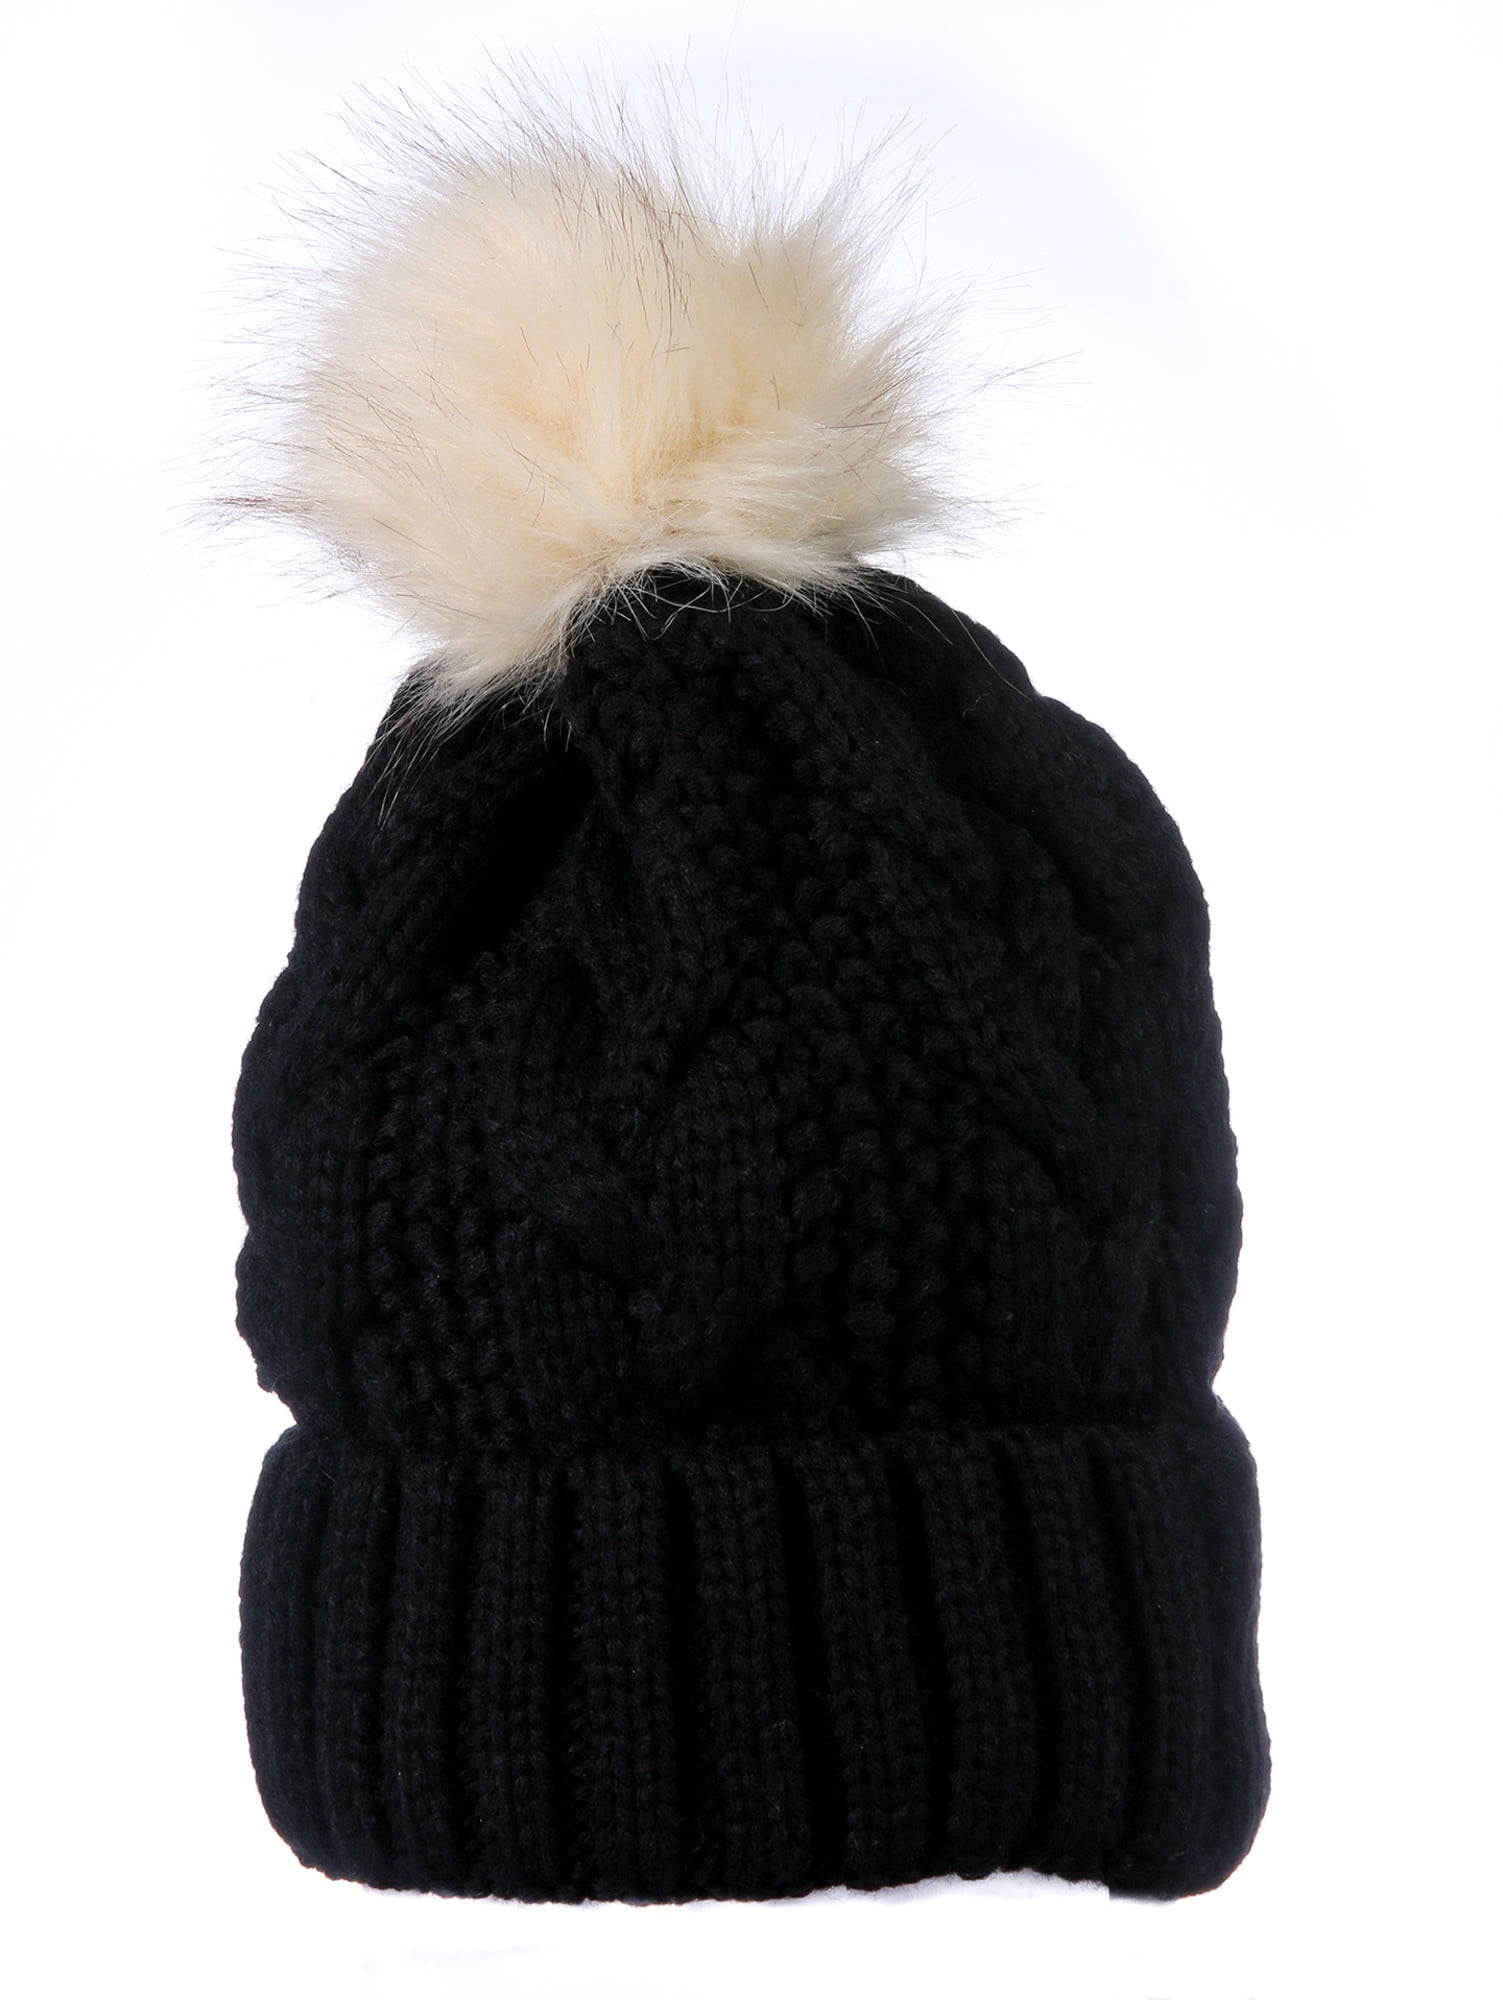 Adults Mens Womens Warm Ribbed Cable Knit Pom Pom Knitted Winter Bobble Hat 